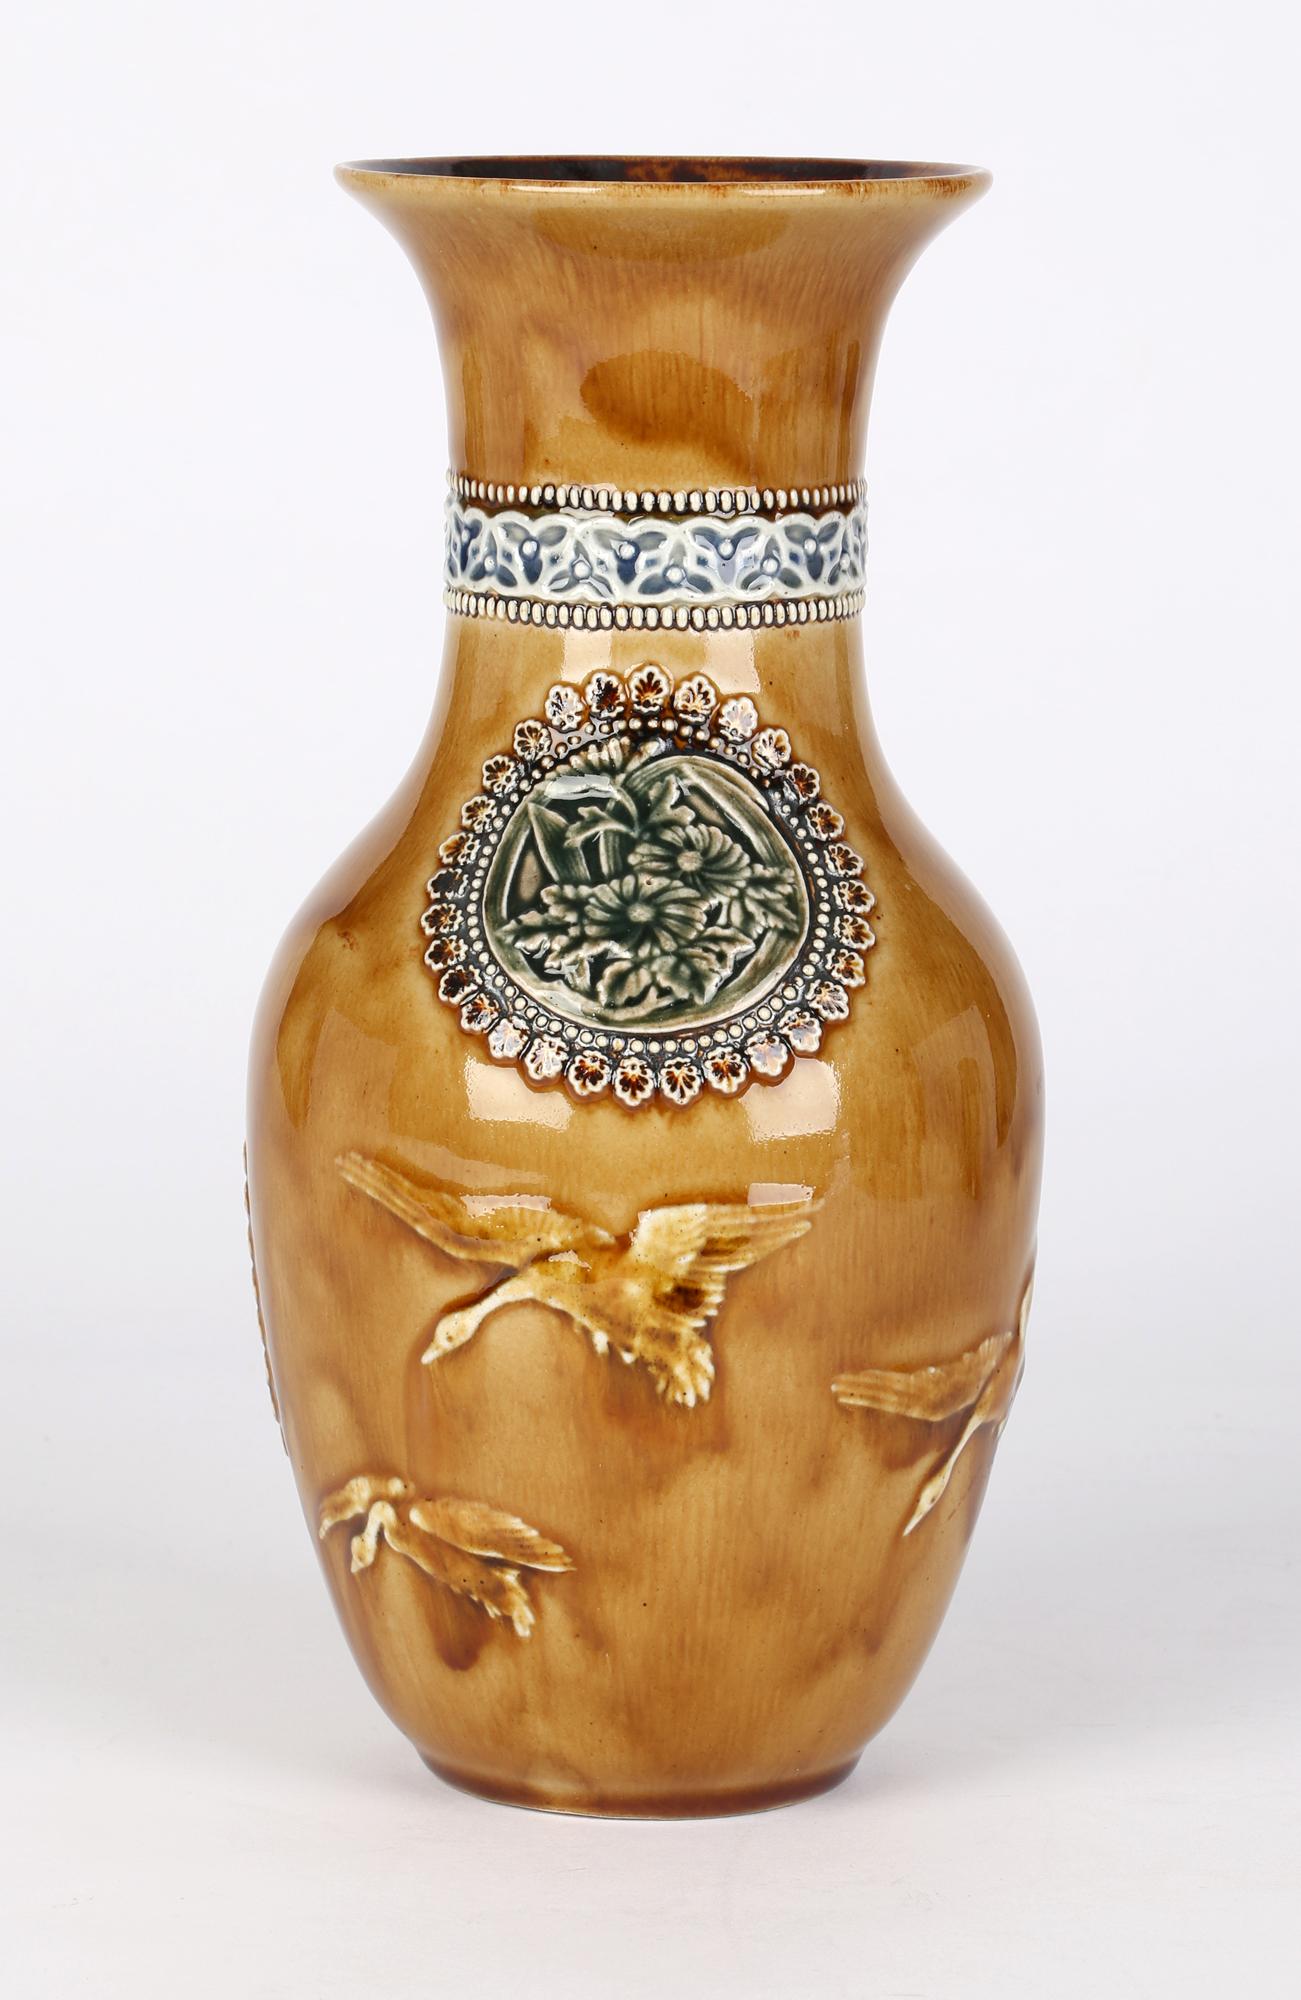 Doulton Lambeth Aesthetic Movement Vase with Geese by Lizzie Axford 8